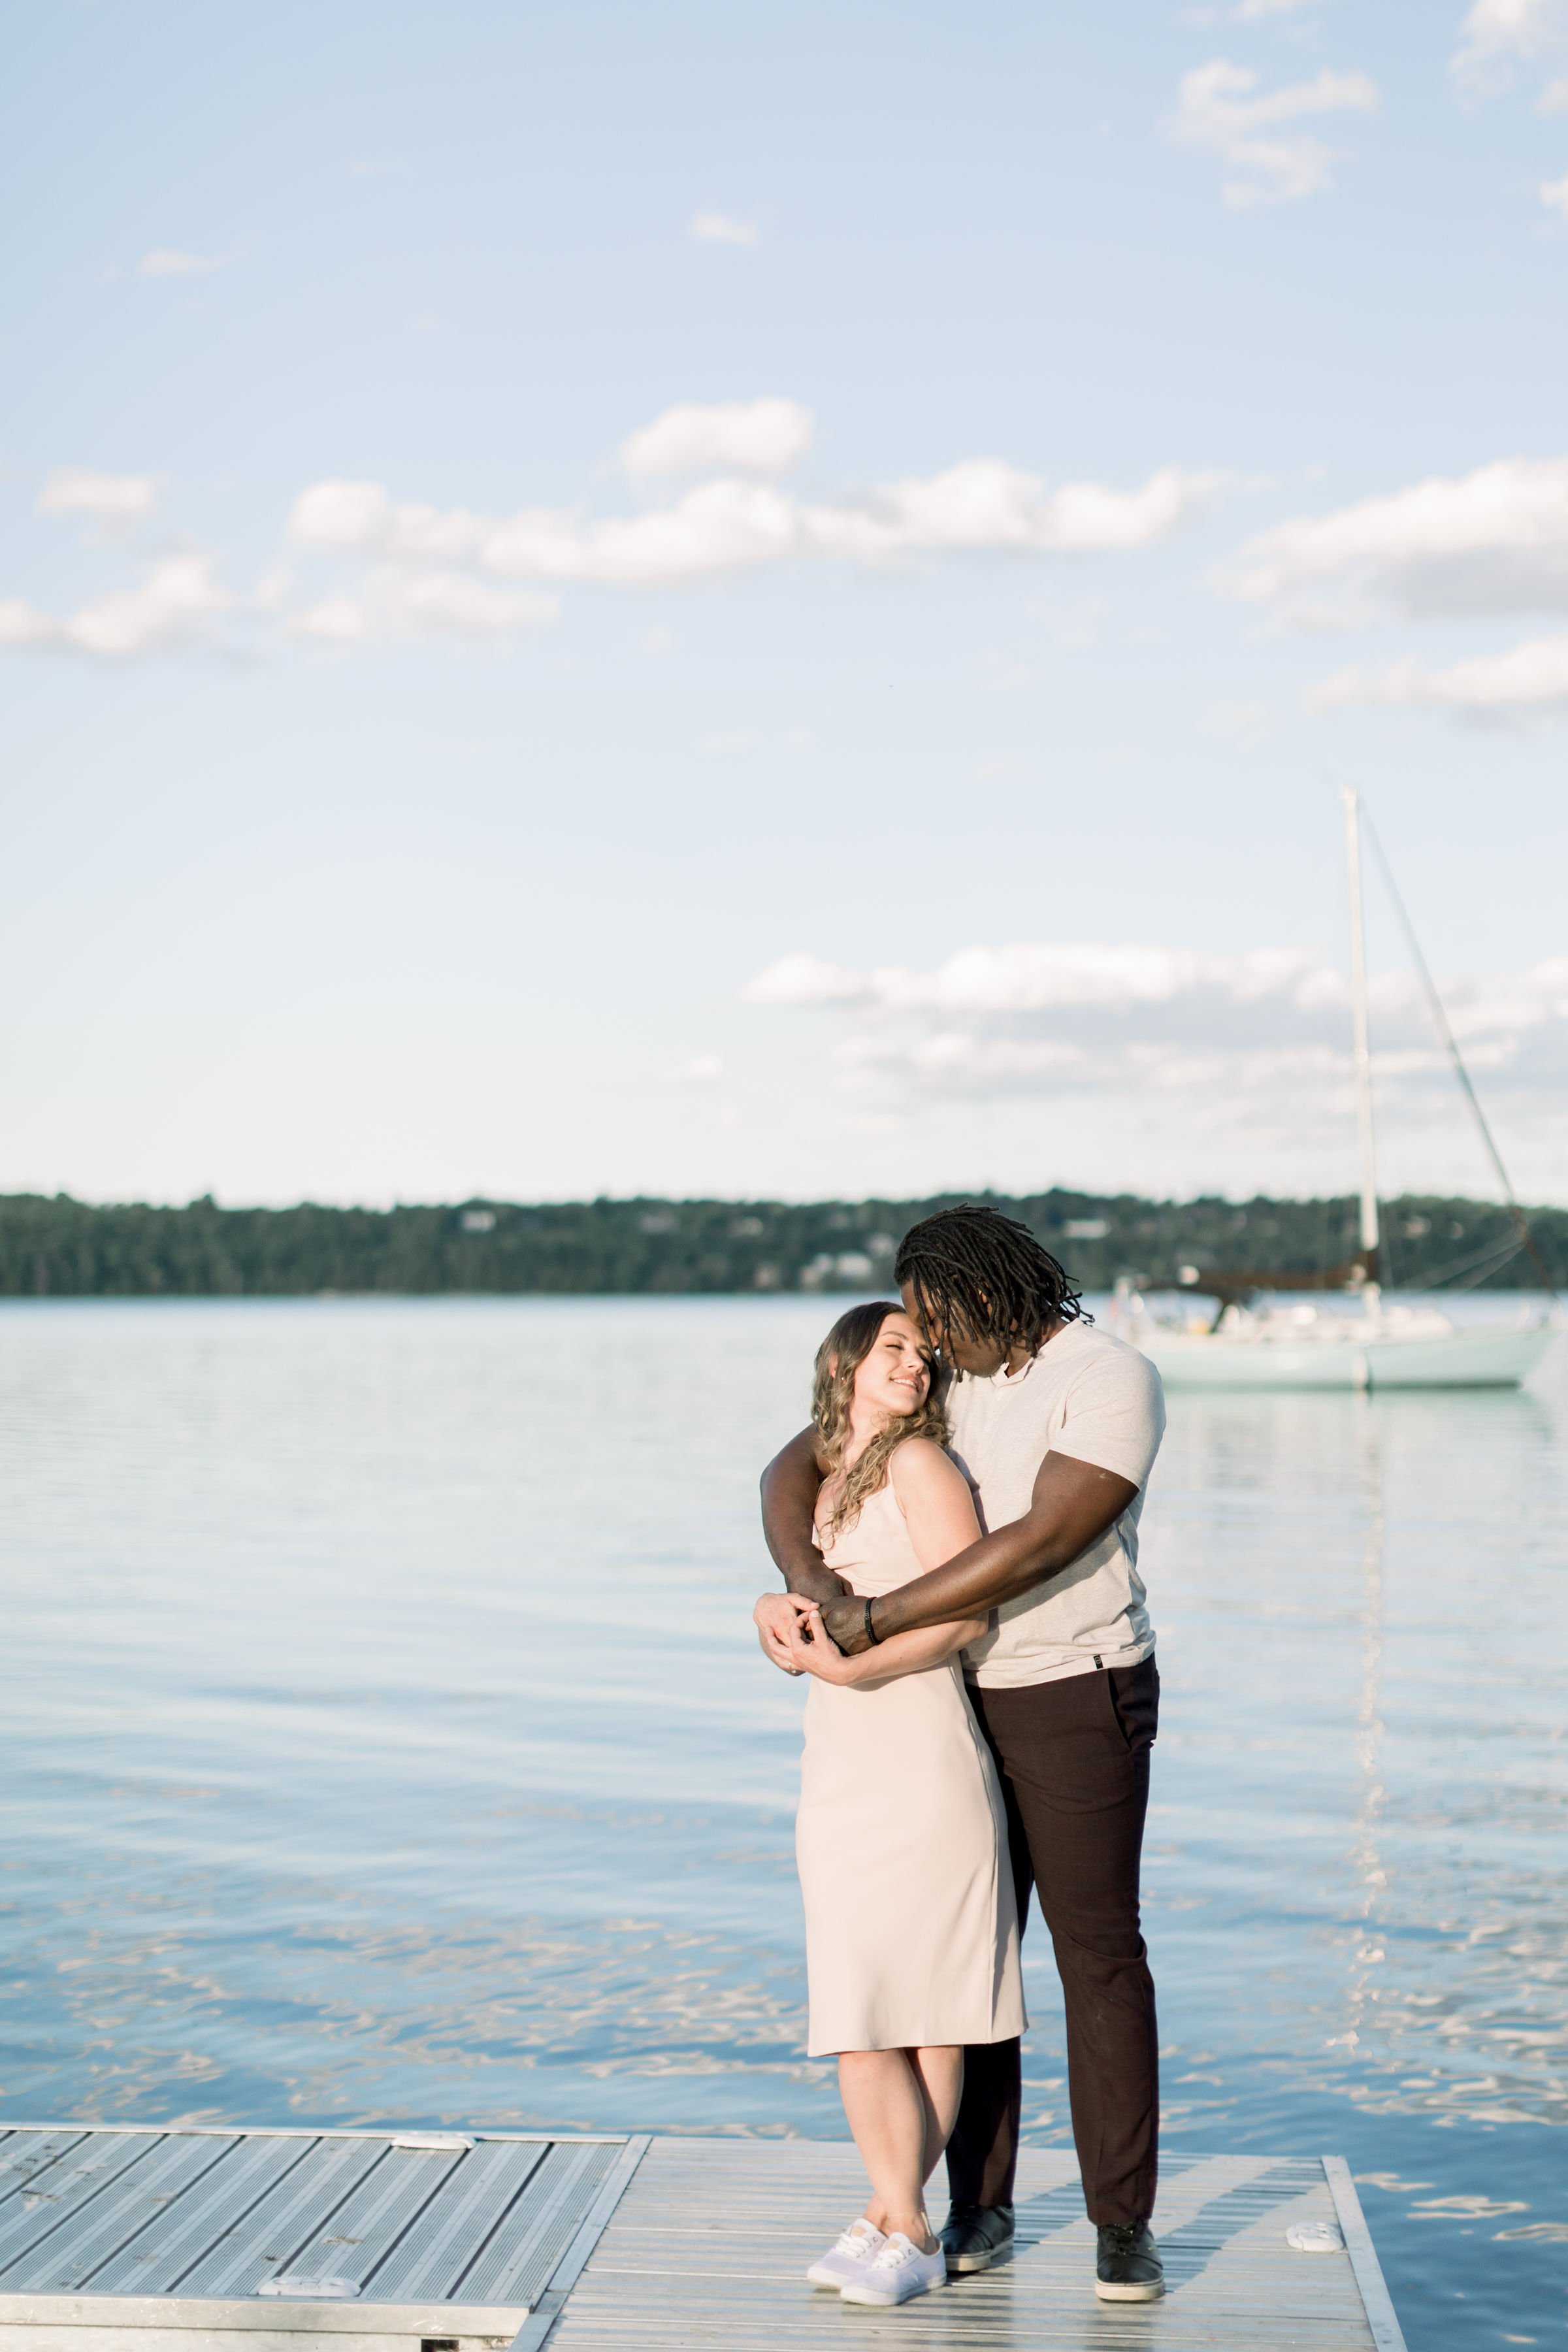  Lake engagement portraits with blue sky in Ontario by Chelsea Mason Photography. lake engagement portraits blue sky hugging #Chelseamasonphotography #Chelseamasonengagements #Onatarioengagements #Pinhey'sPoint #Ontarioweddingphotographers 